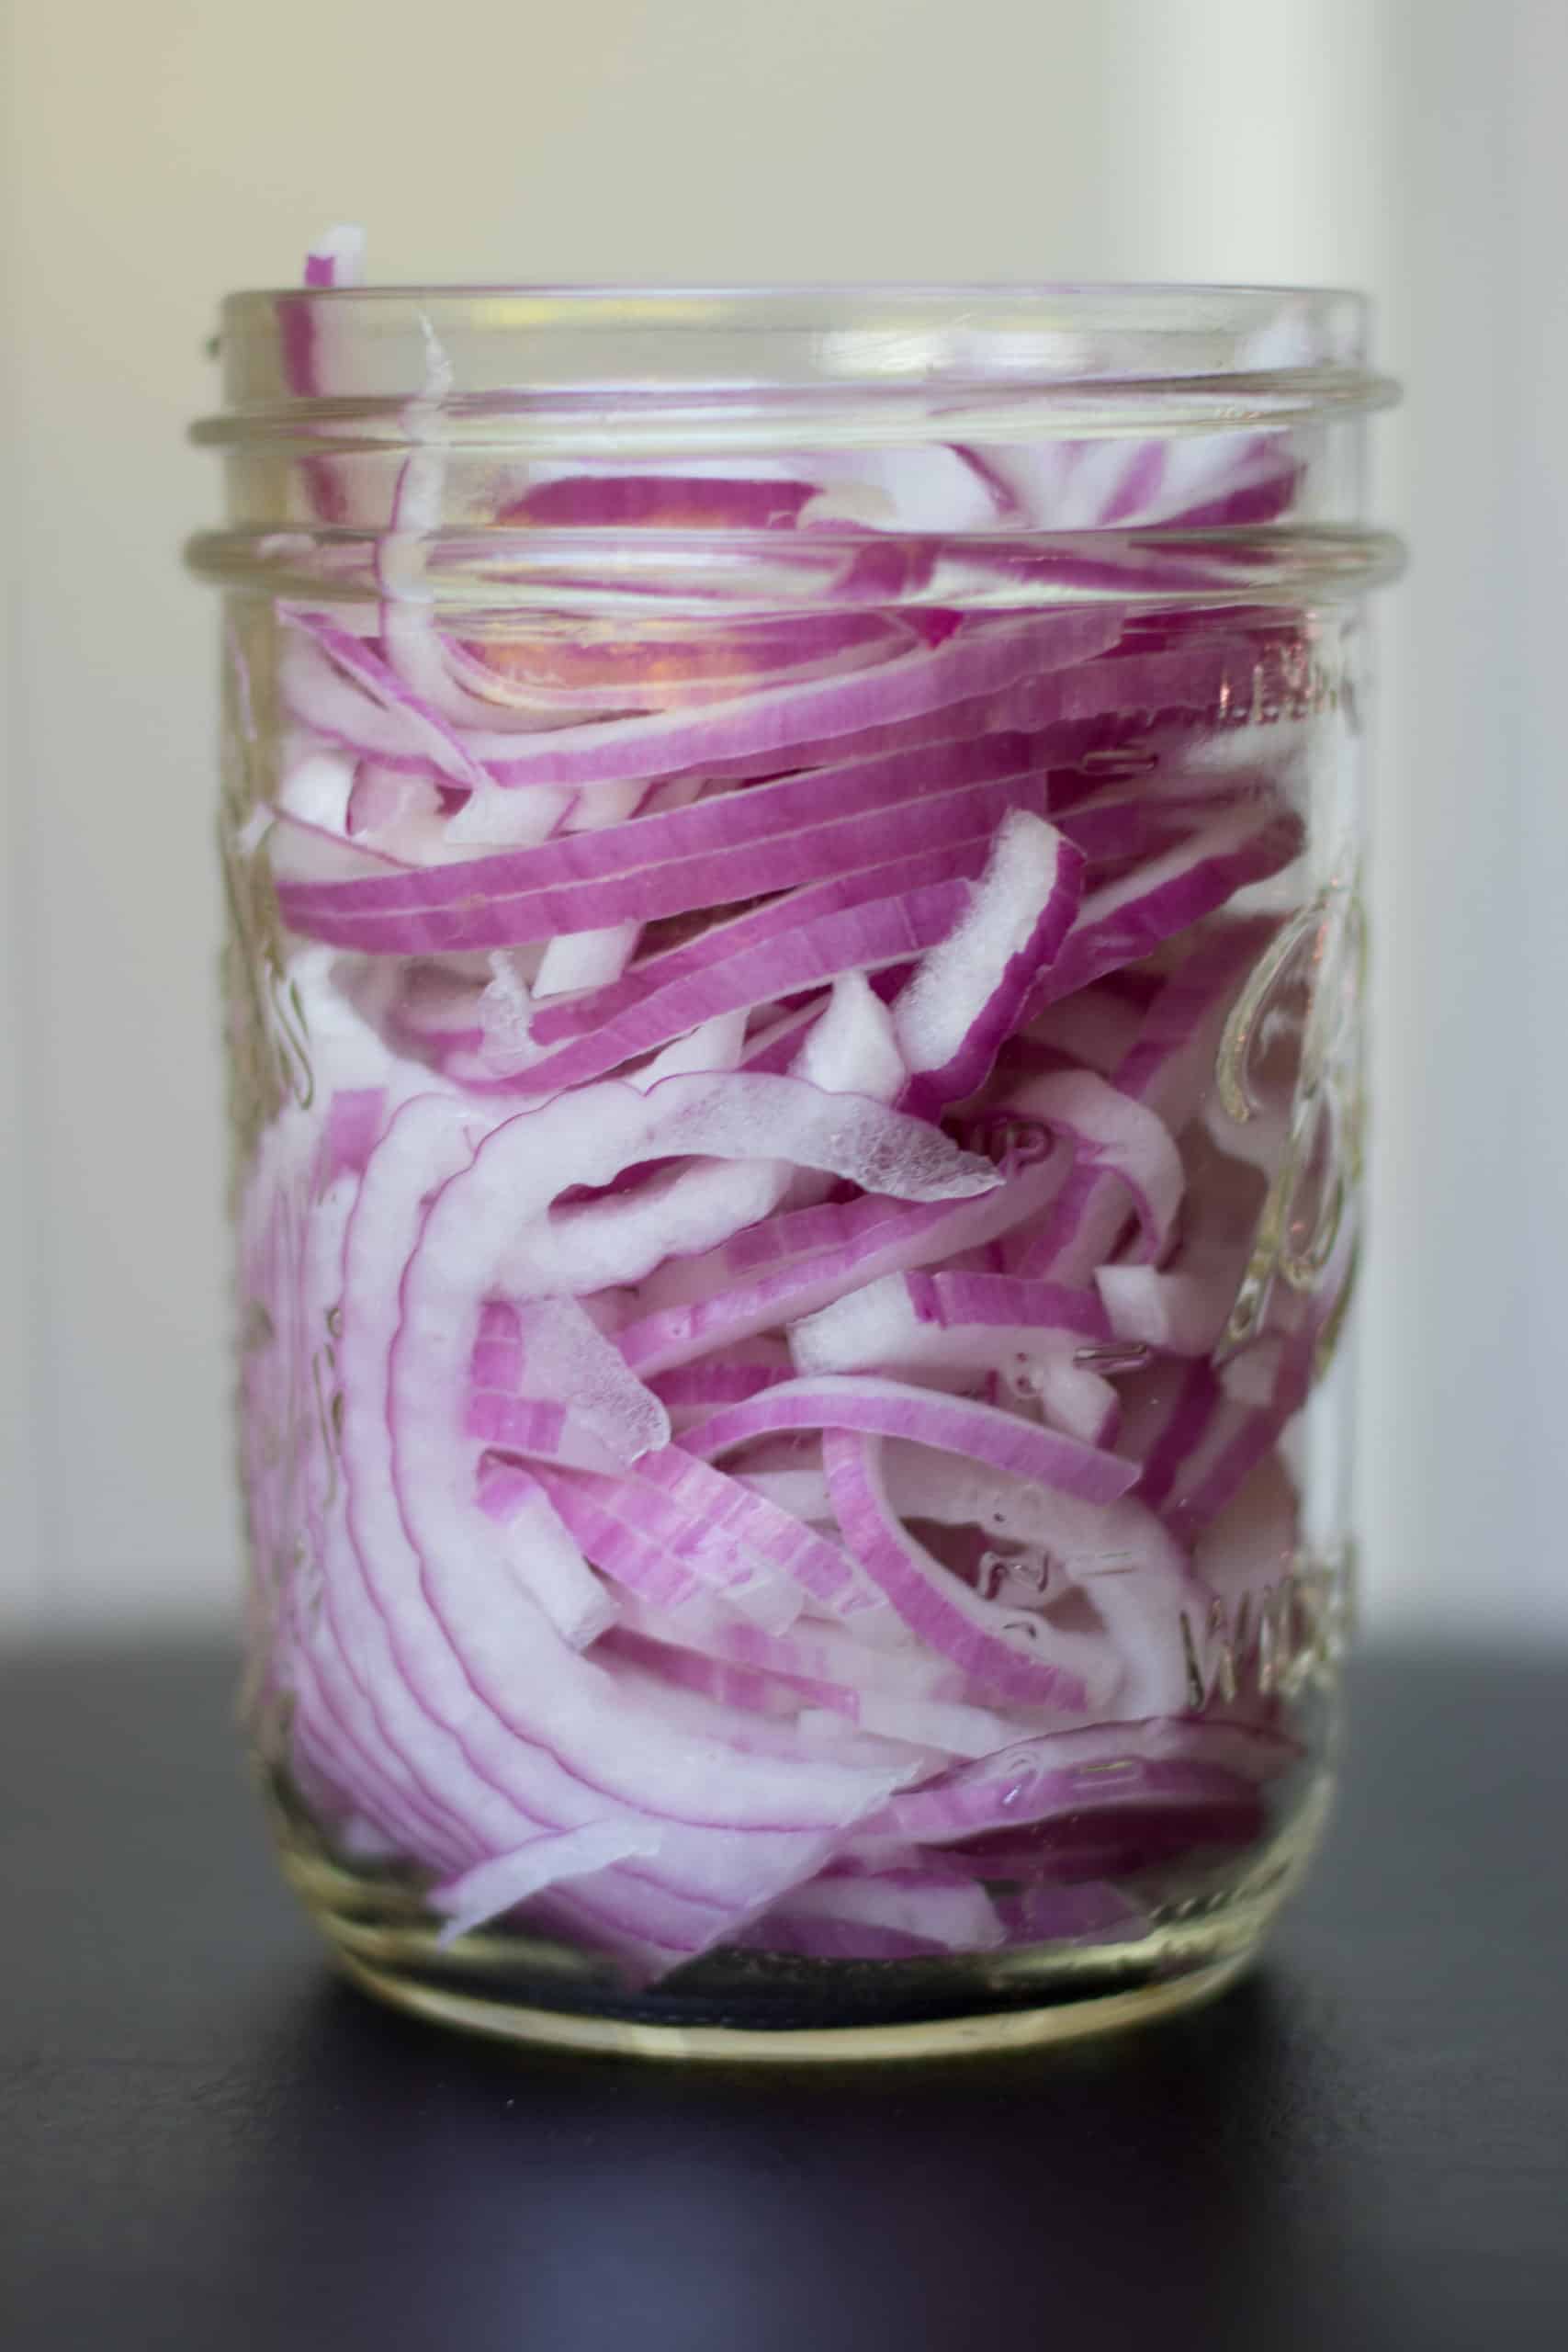 red onions in a jar